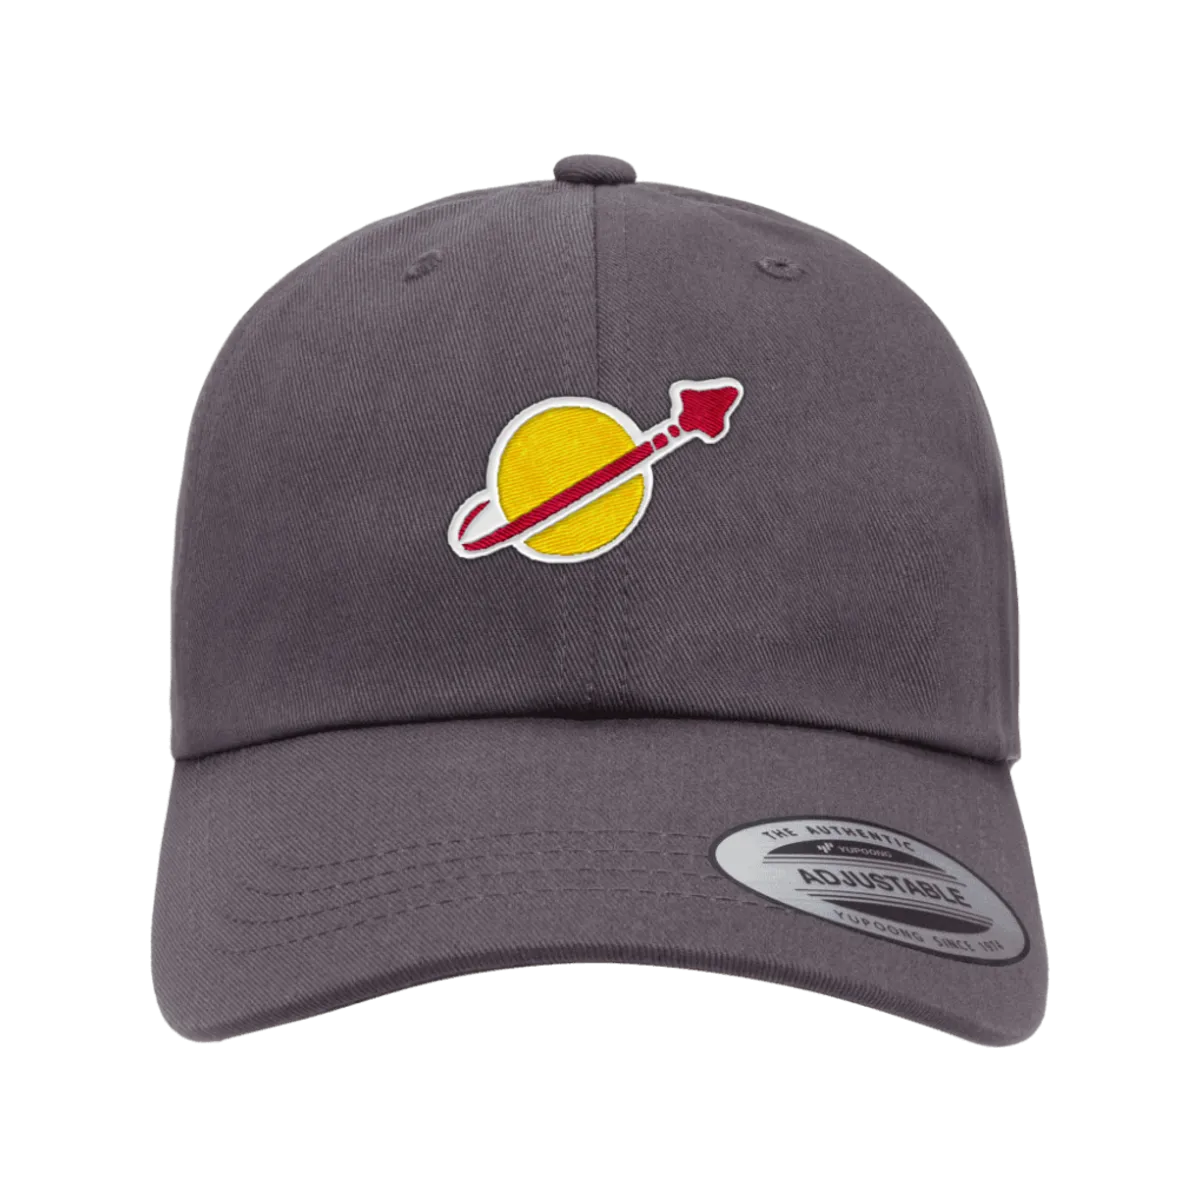 Rebel Alliance Hat” graphic dad hat by Christopher Michon